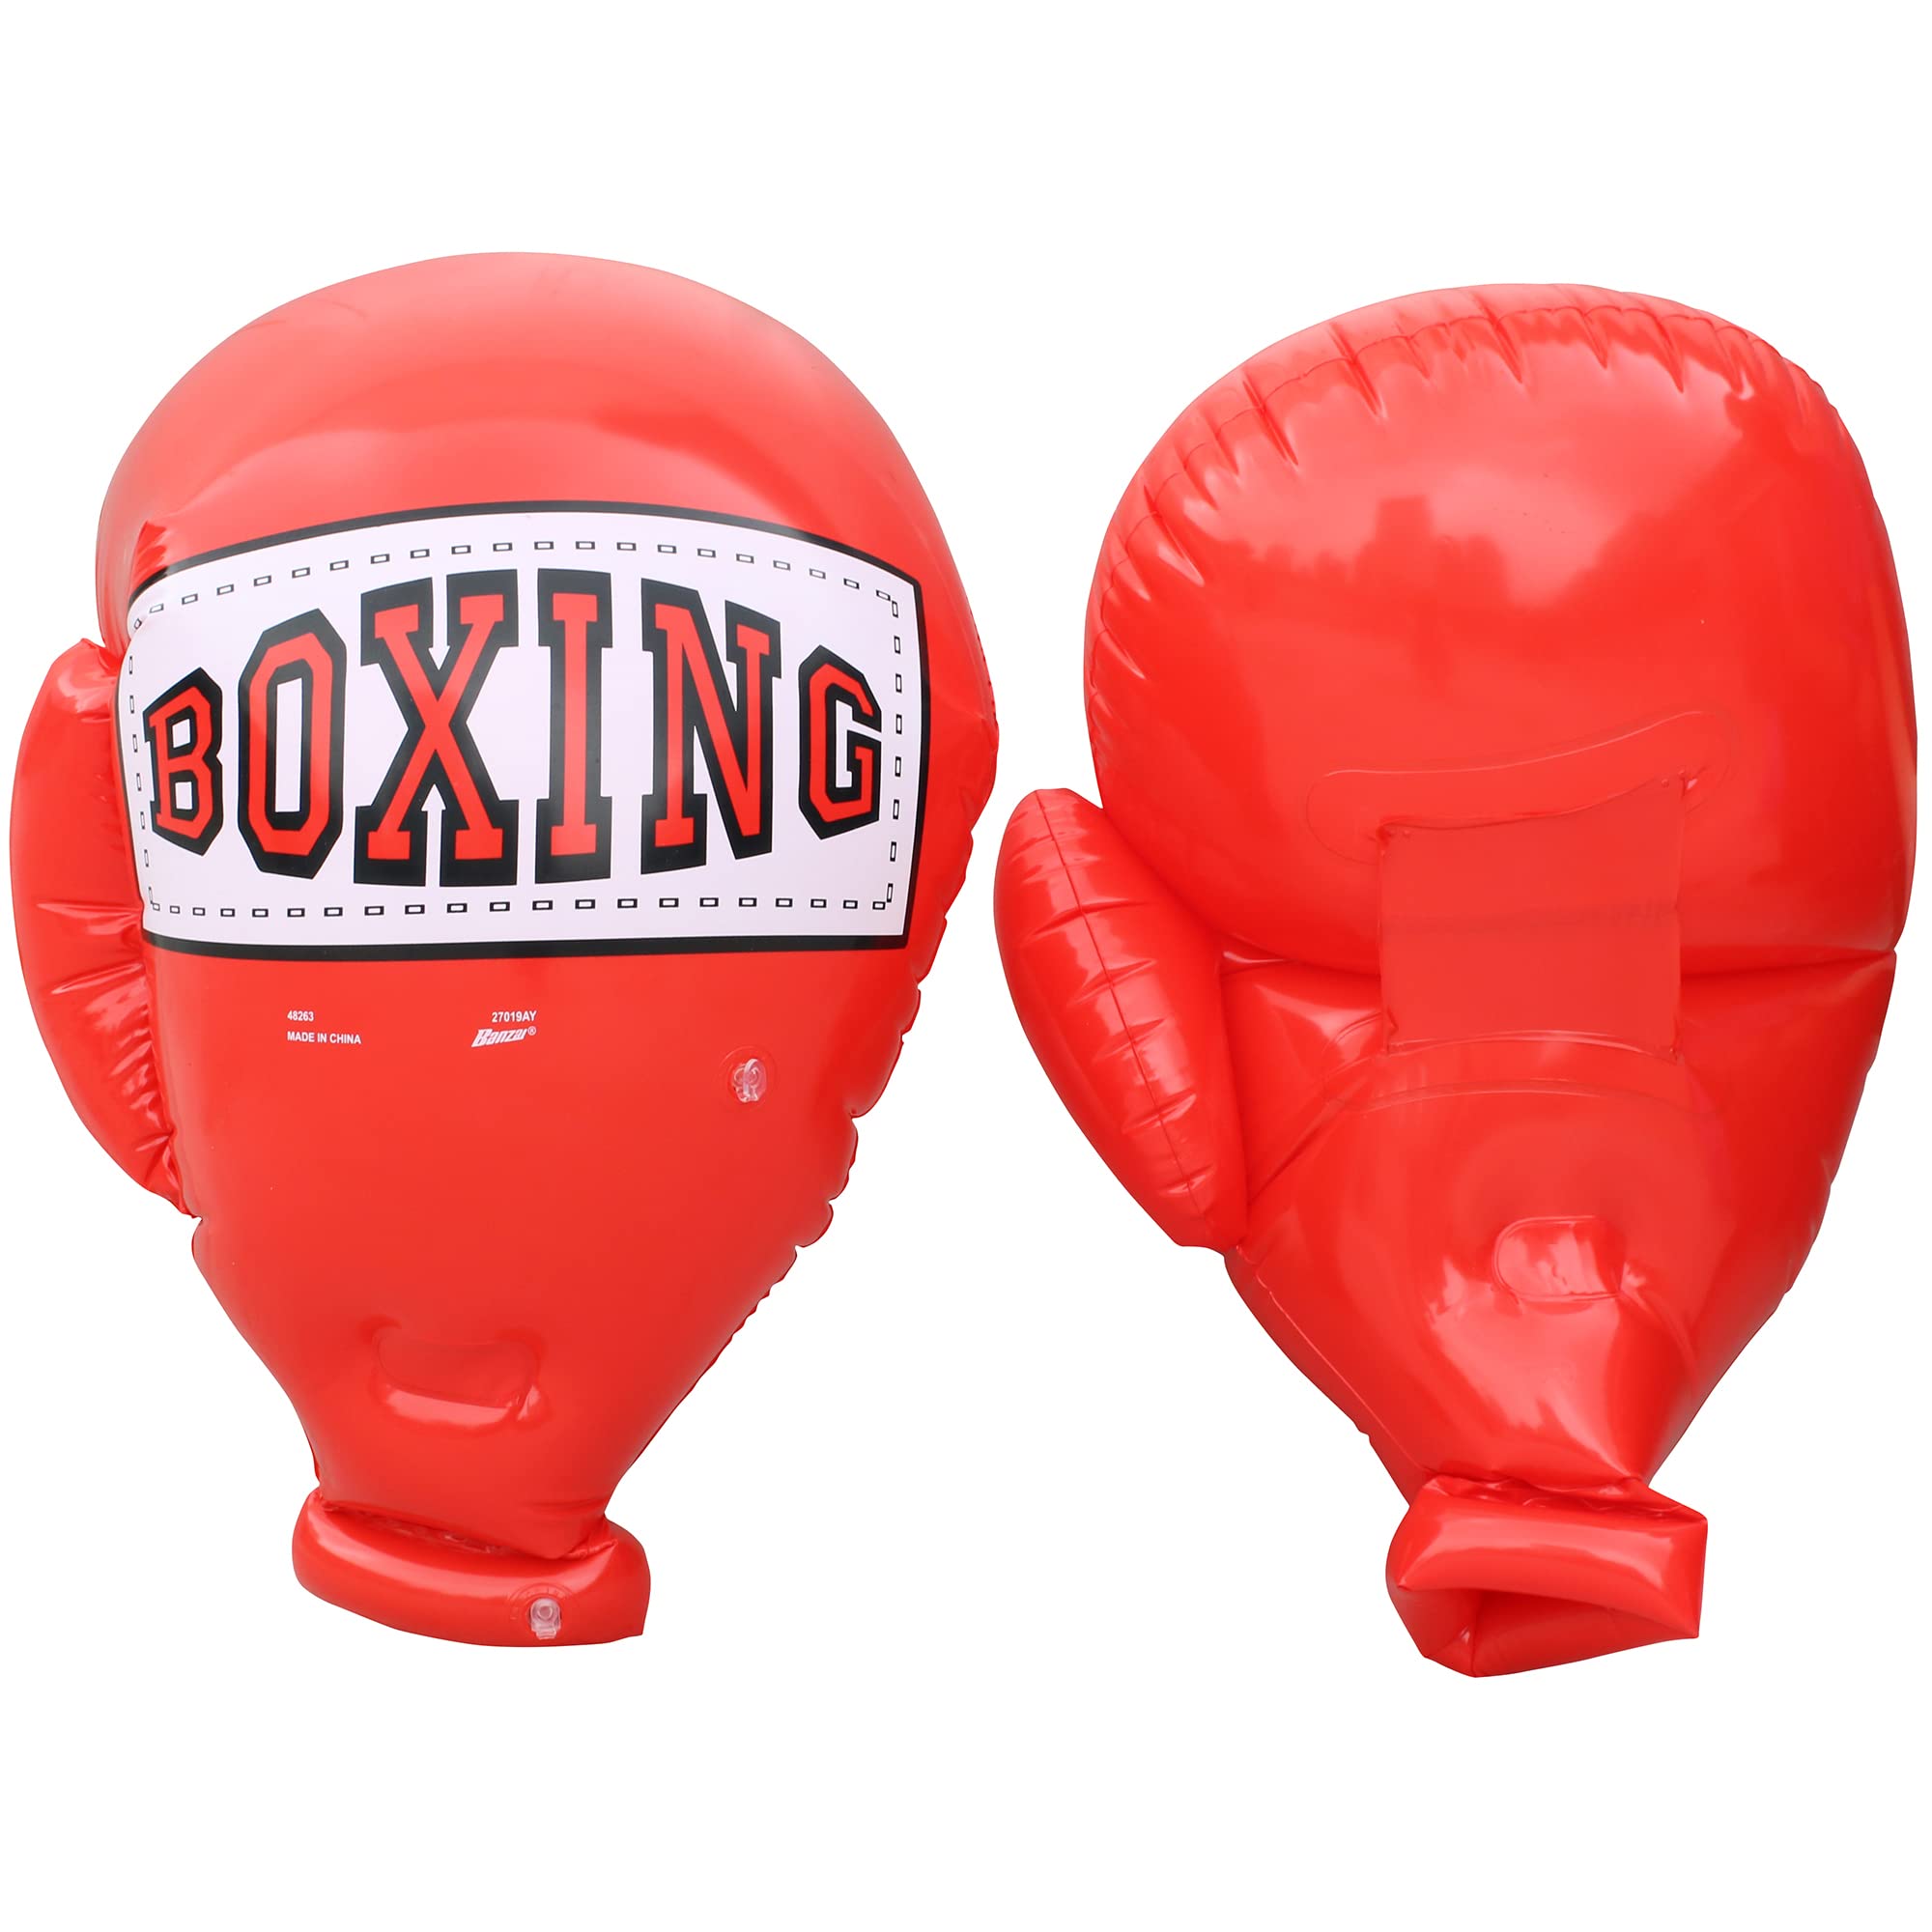 Banzai Kids Inflatable Mega Boxing Gloves 1 Set (Red or Blue)